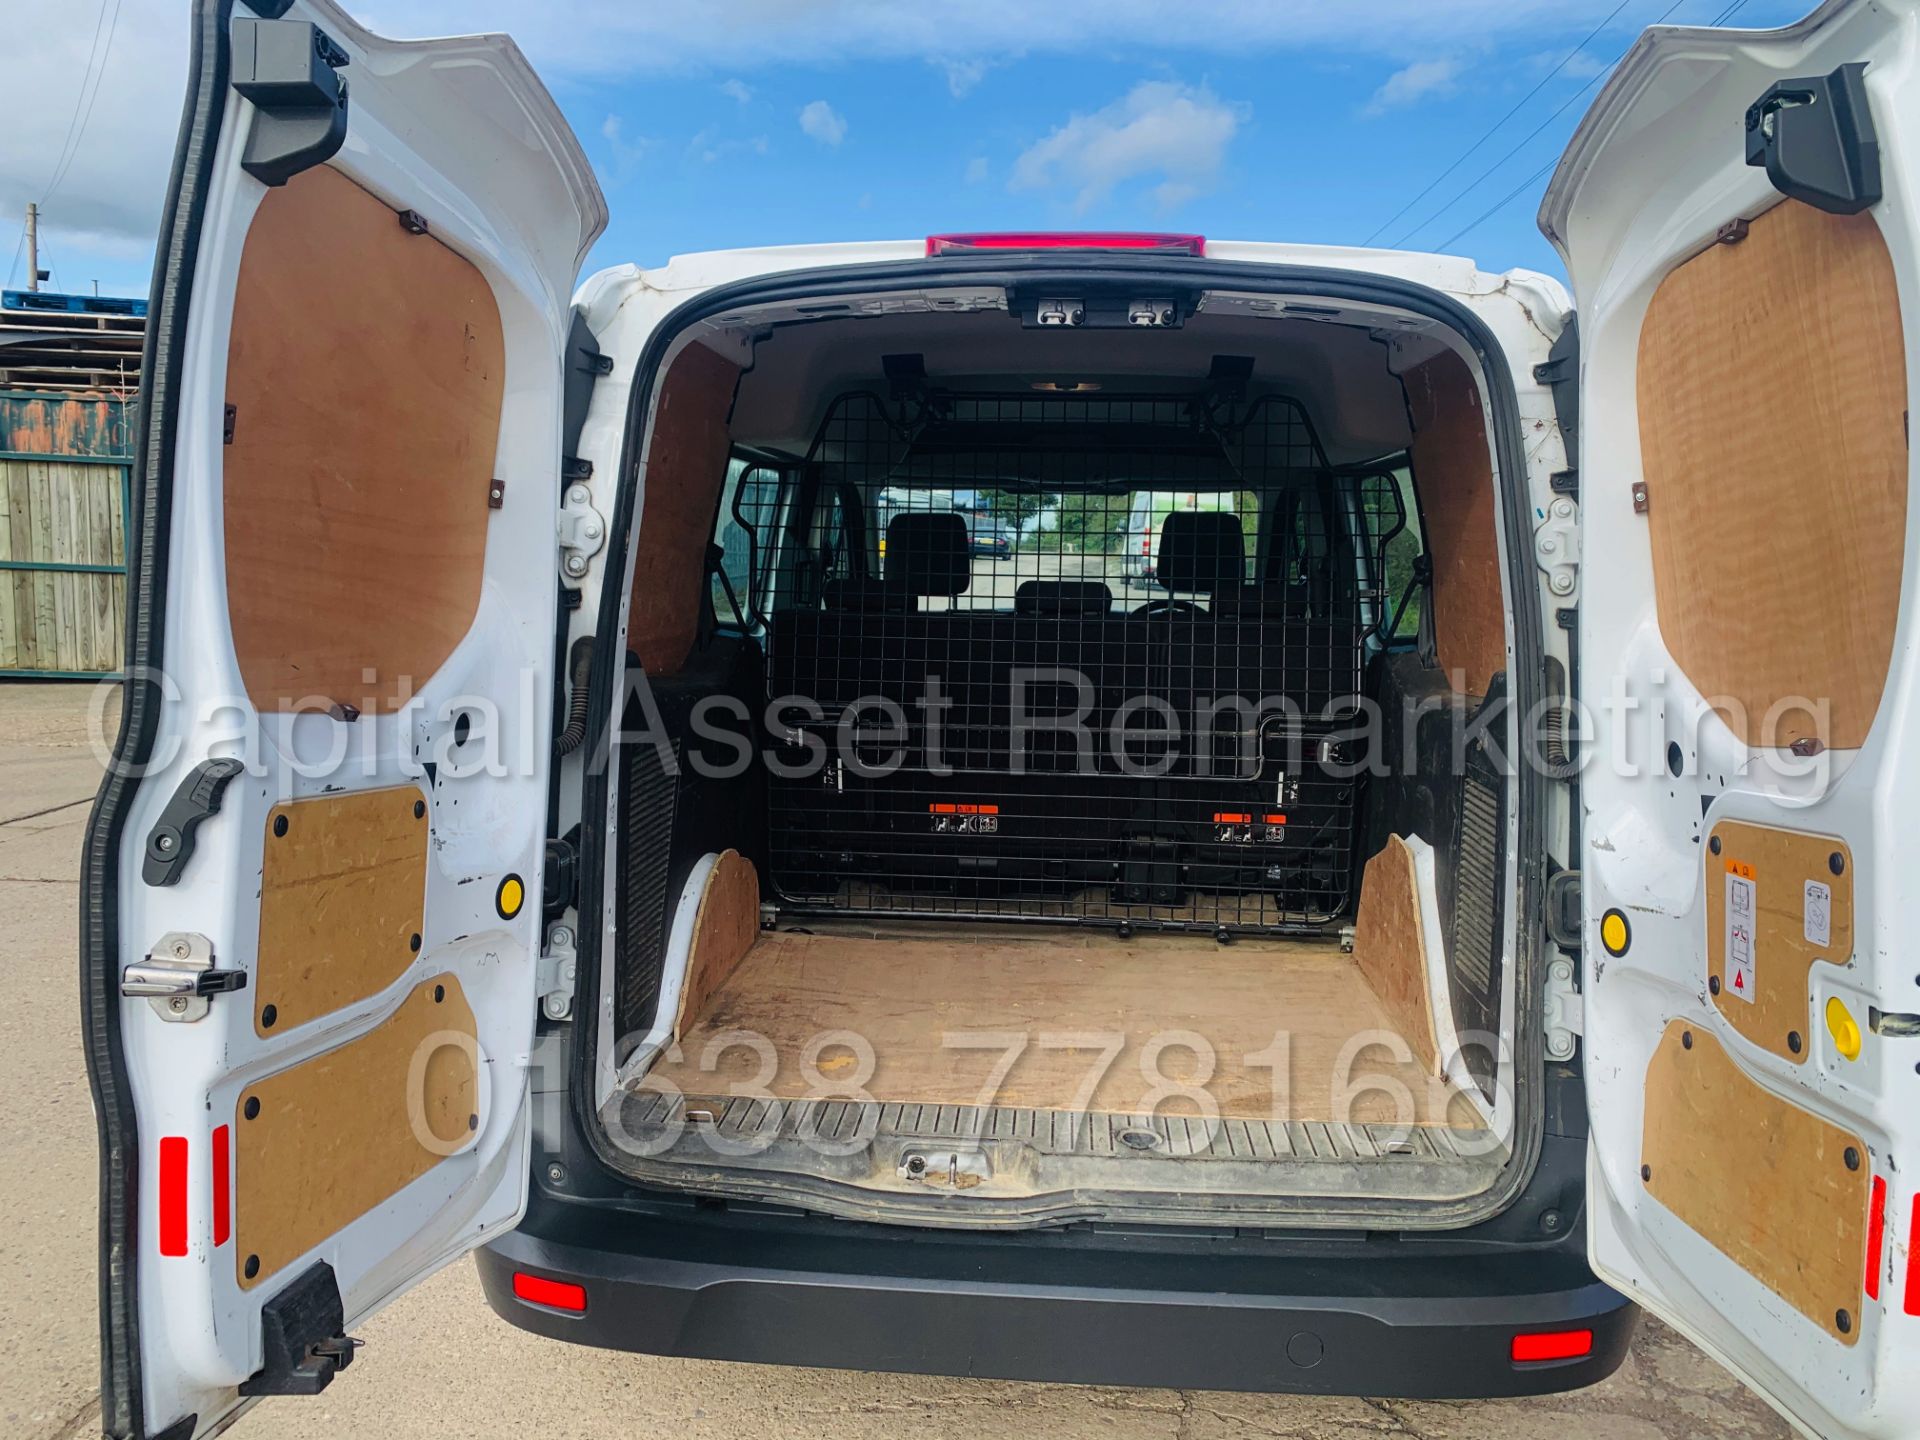 (On Sale) FORD TRANSIT CONNECT *LWB - 5 SEATER CREW VAN* (67 REG - EURO 6) 1.5 TDCI *A/C* (1 OWNER) - Image 23 of 40